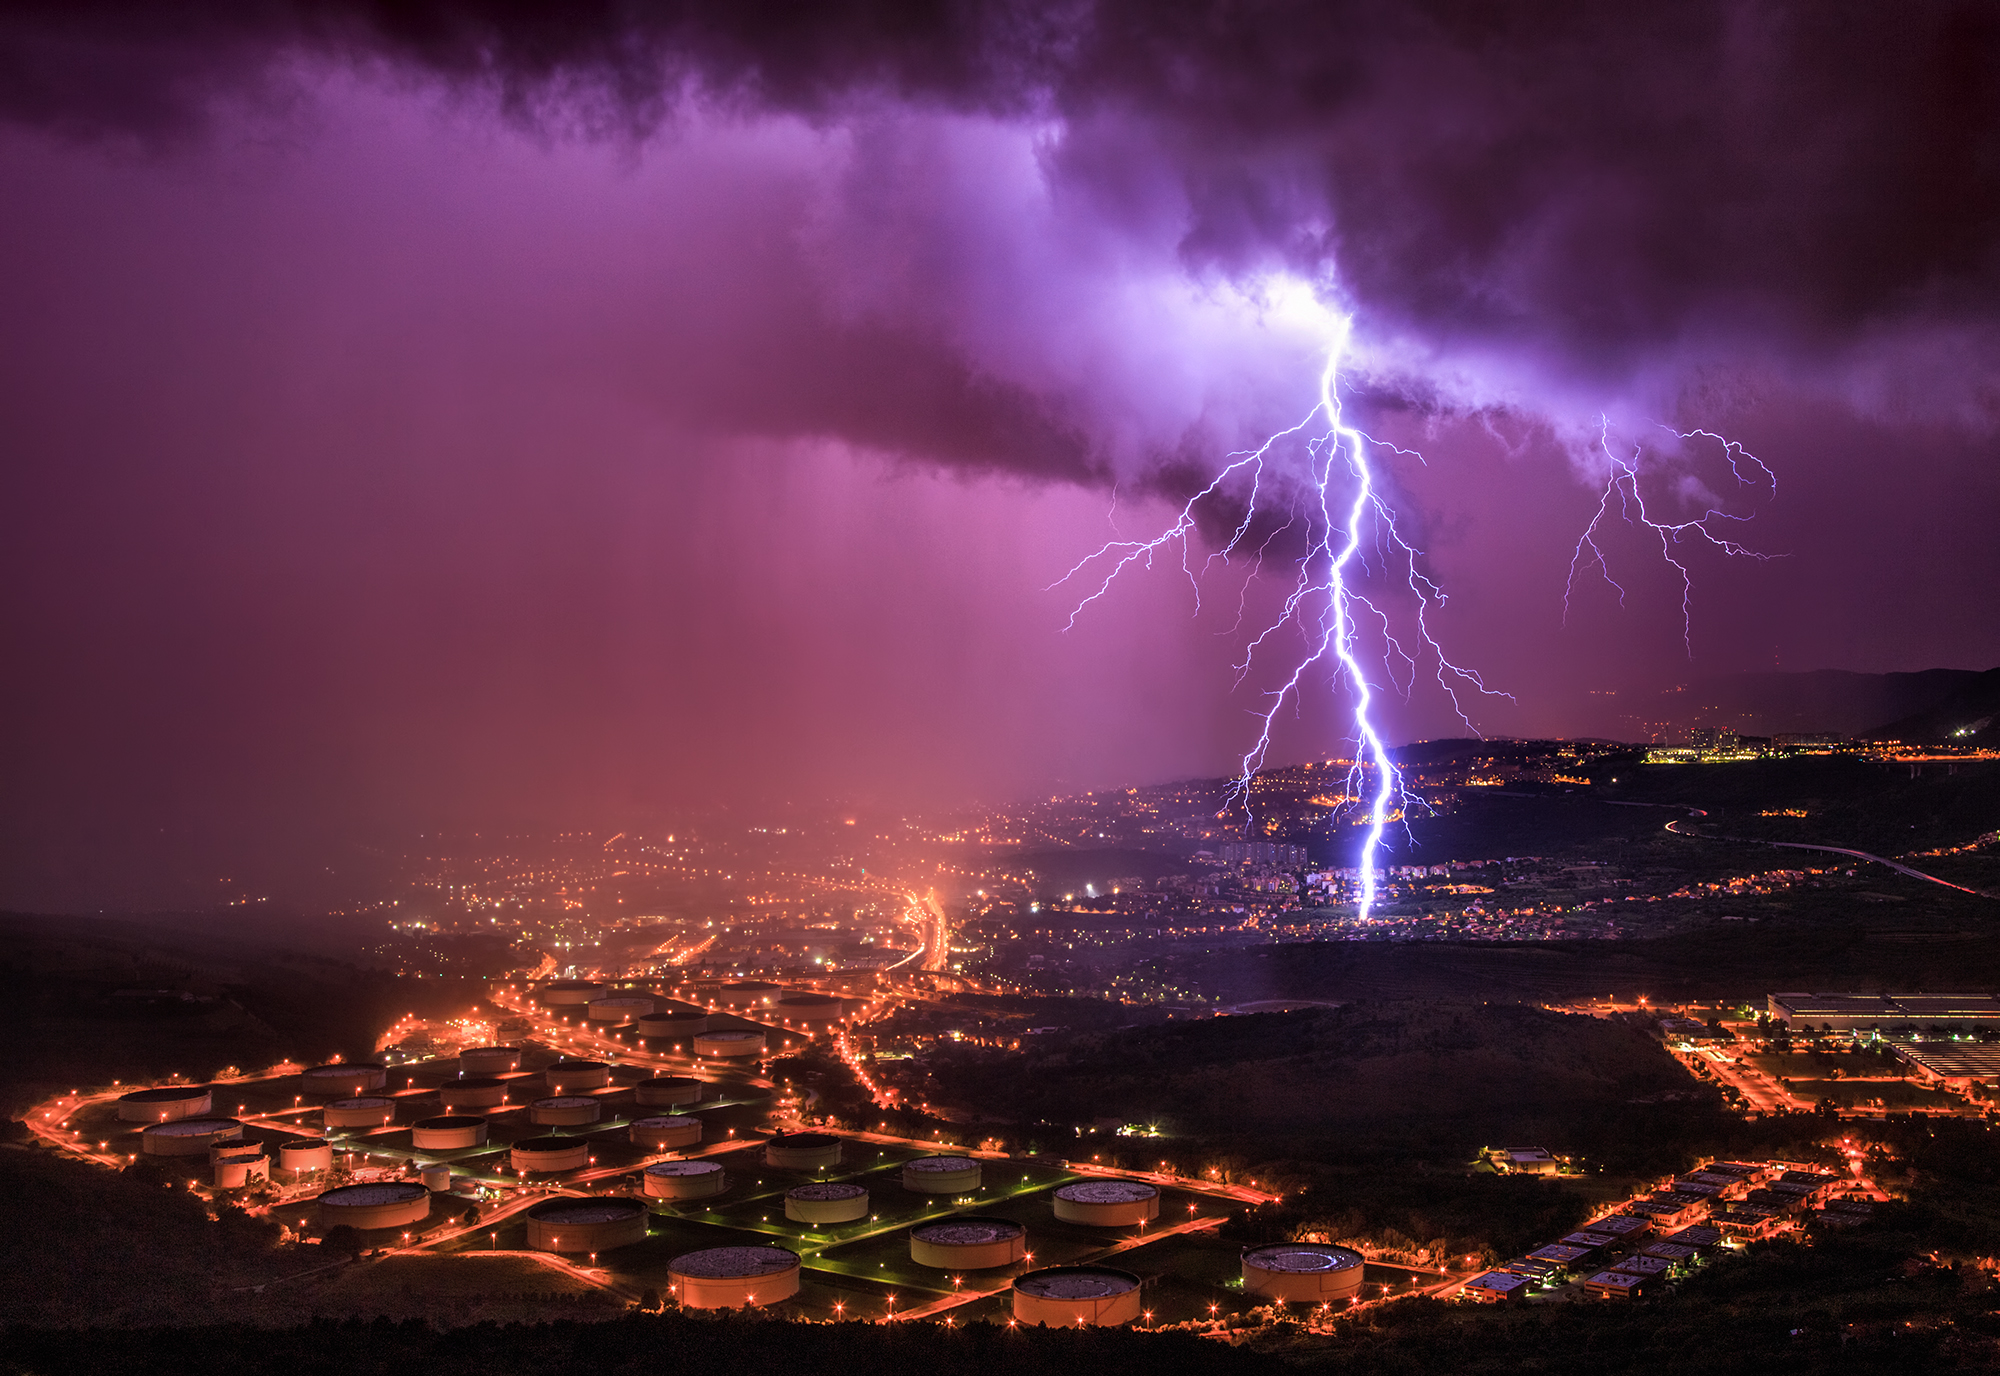 A Day In The Life Of Extreme Weather Photographer Marko Korošec